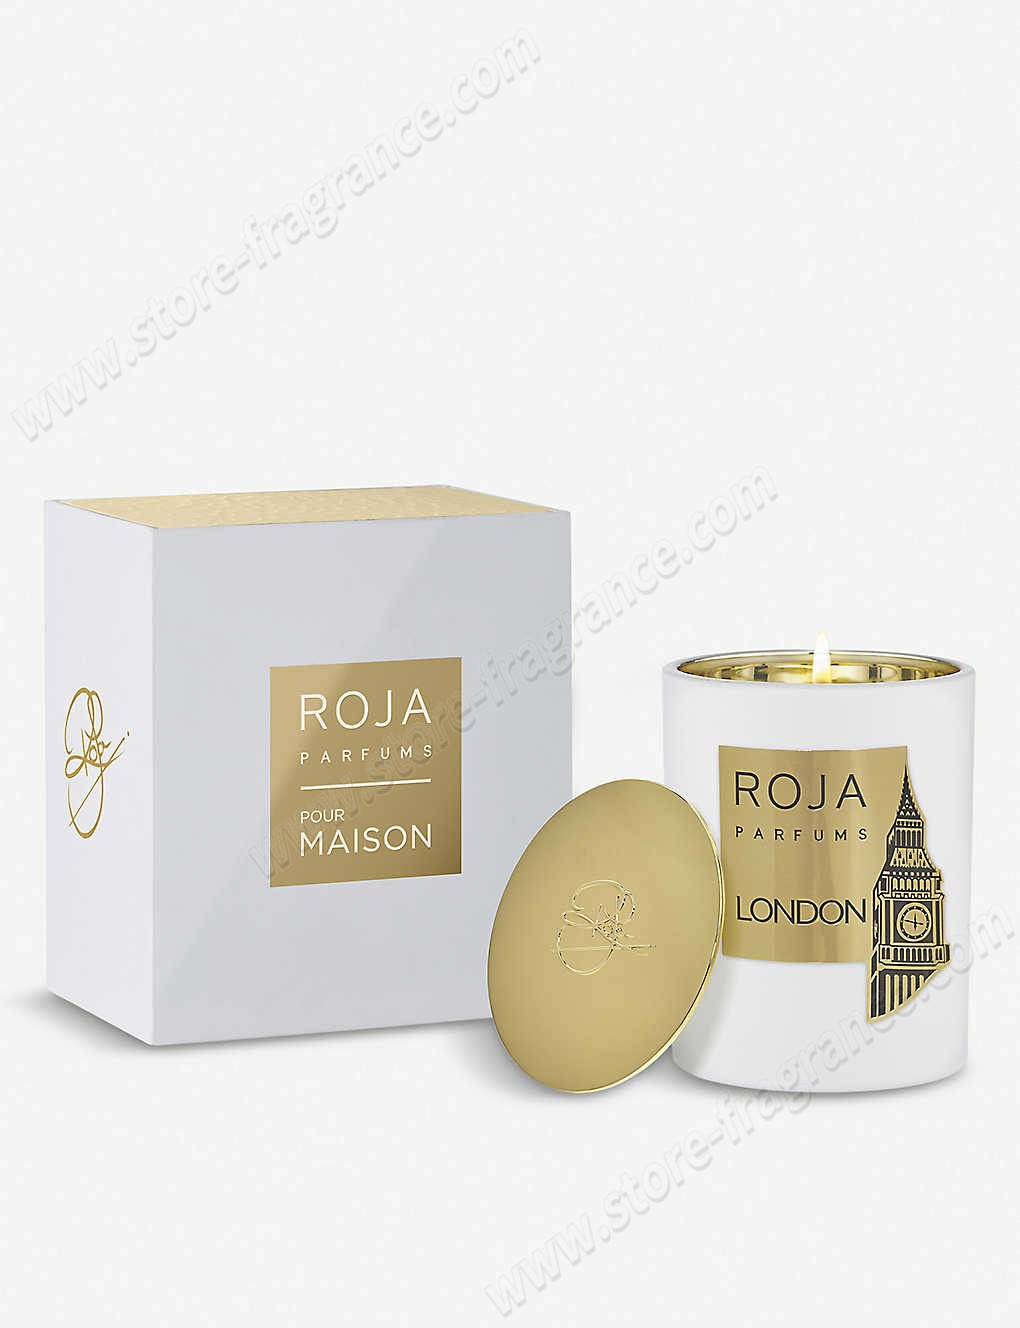 ROJA PARFUMS/London scented candle 300g ✿ Discount Store - -1